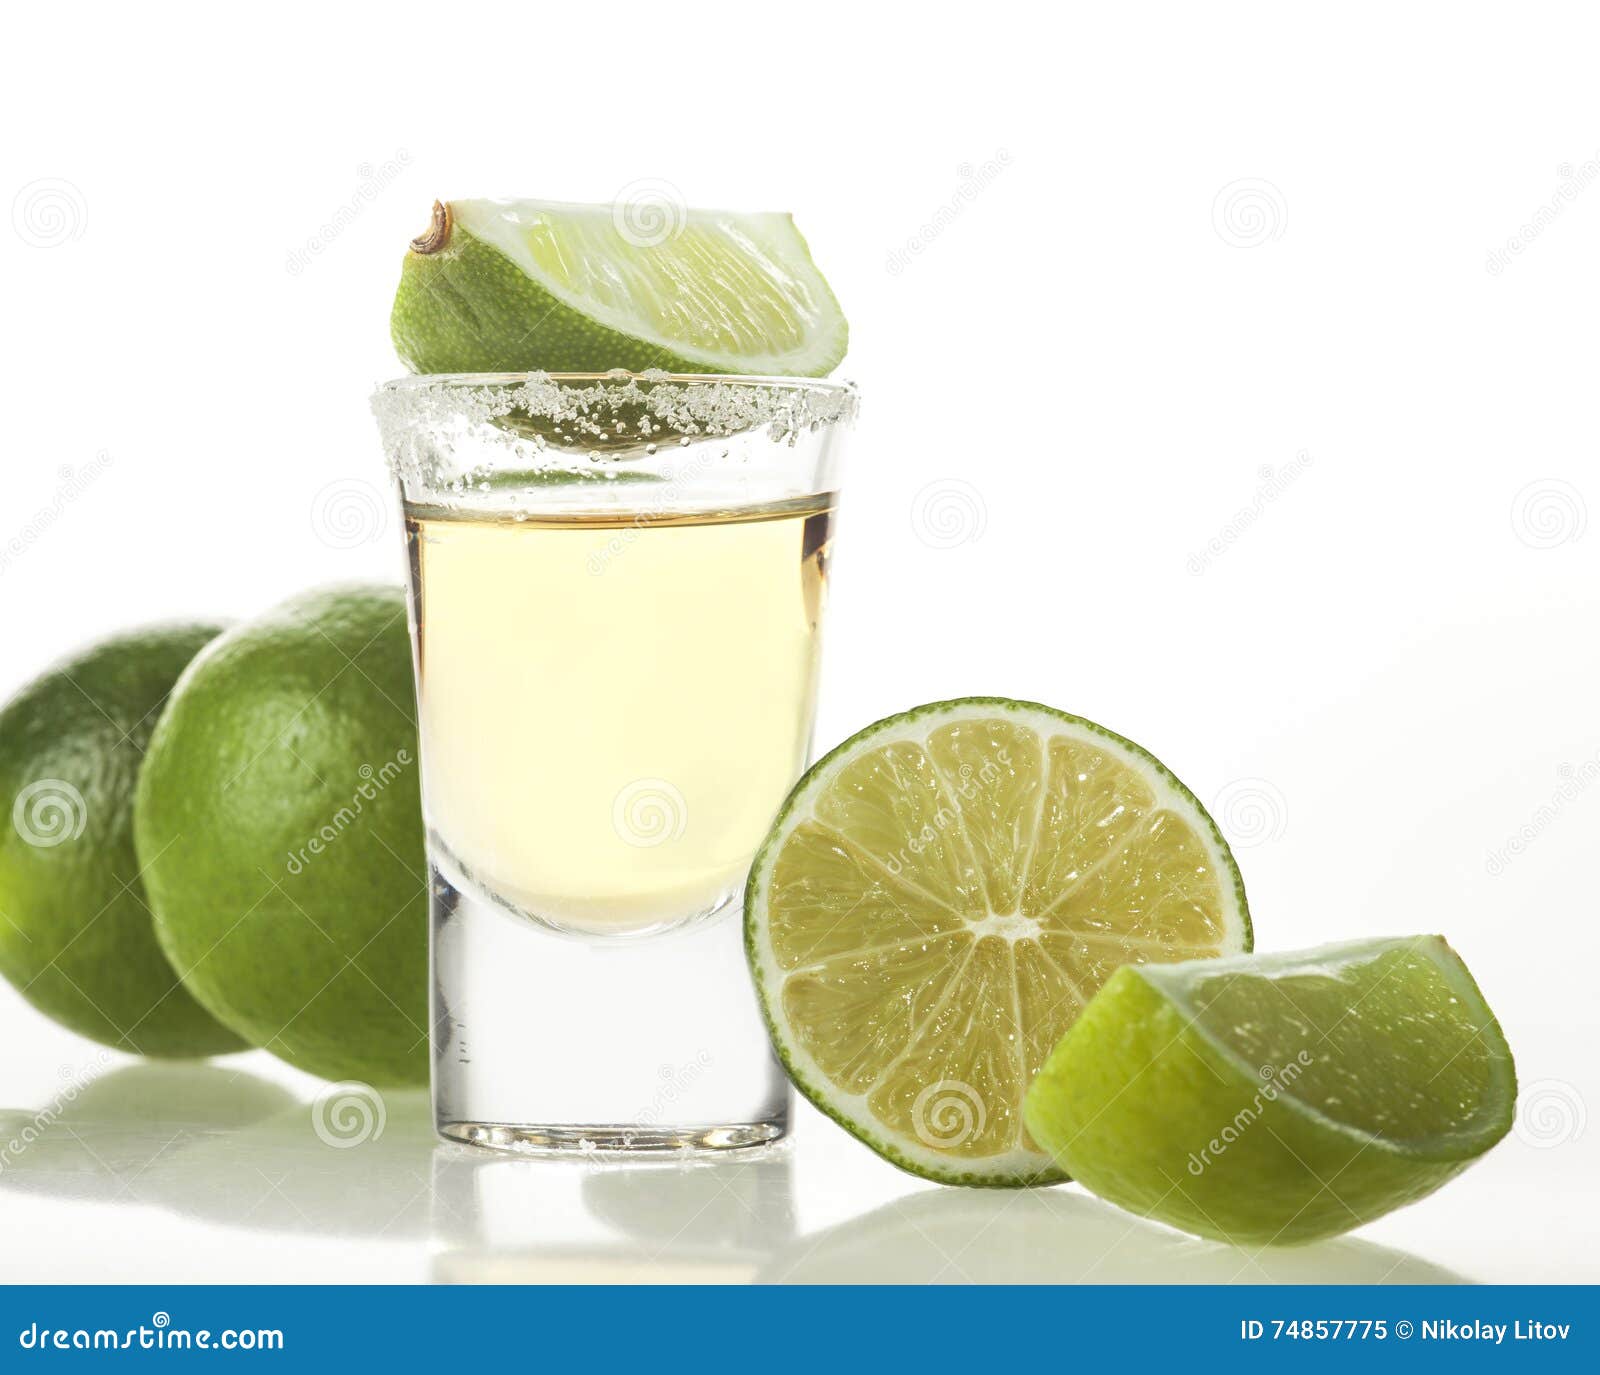 Tequila Shot on White Background Stock Image - Image of mexican, lime ...